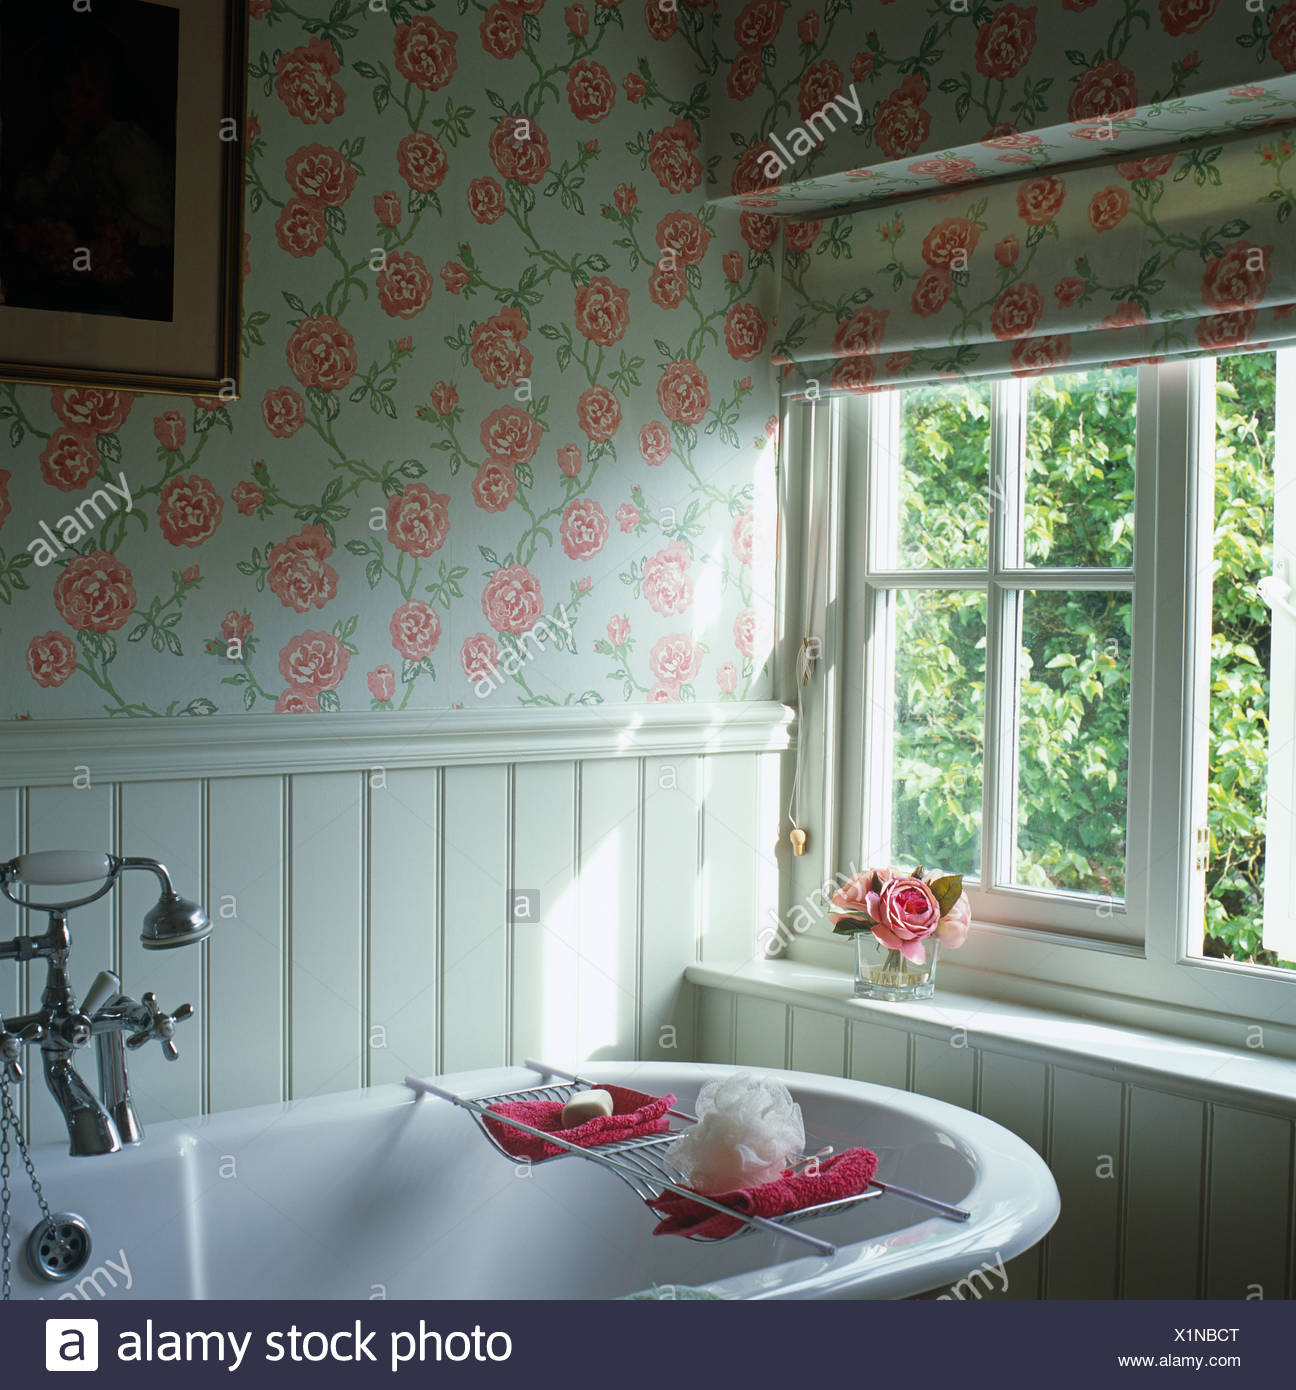 Rose Patterned Roman Blind And Wallpaper In Cottage Bathroom With